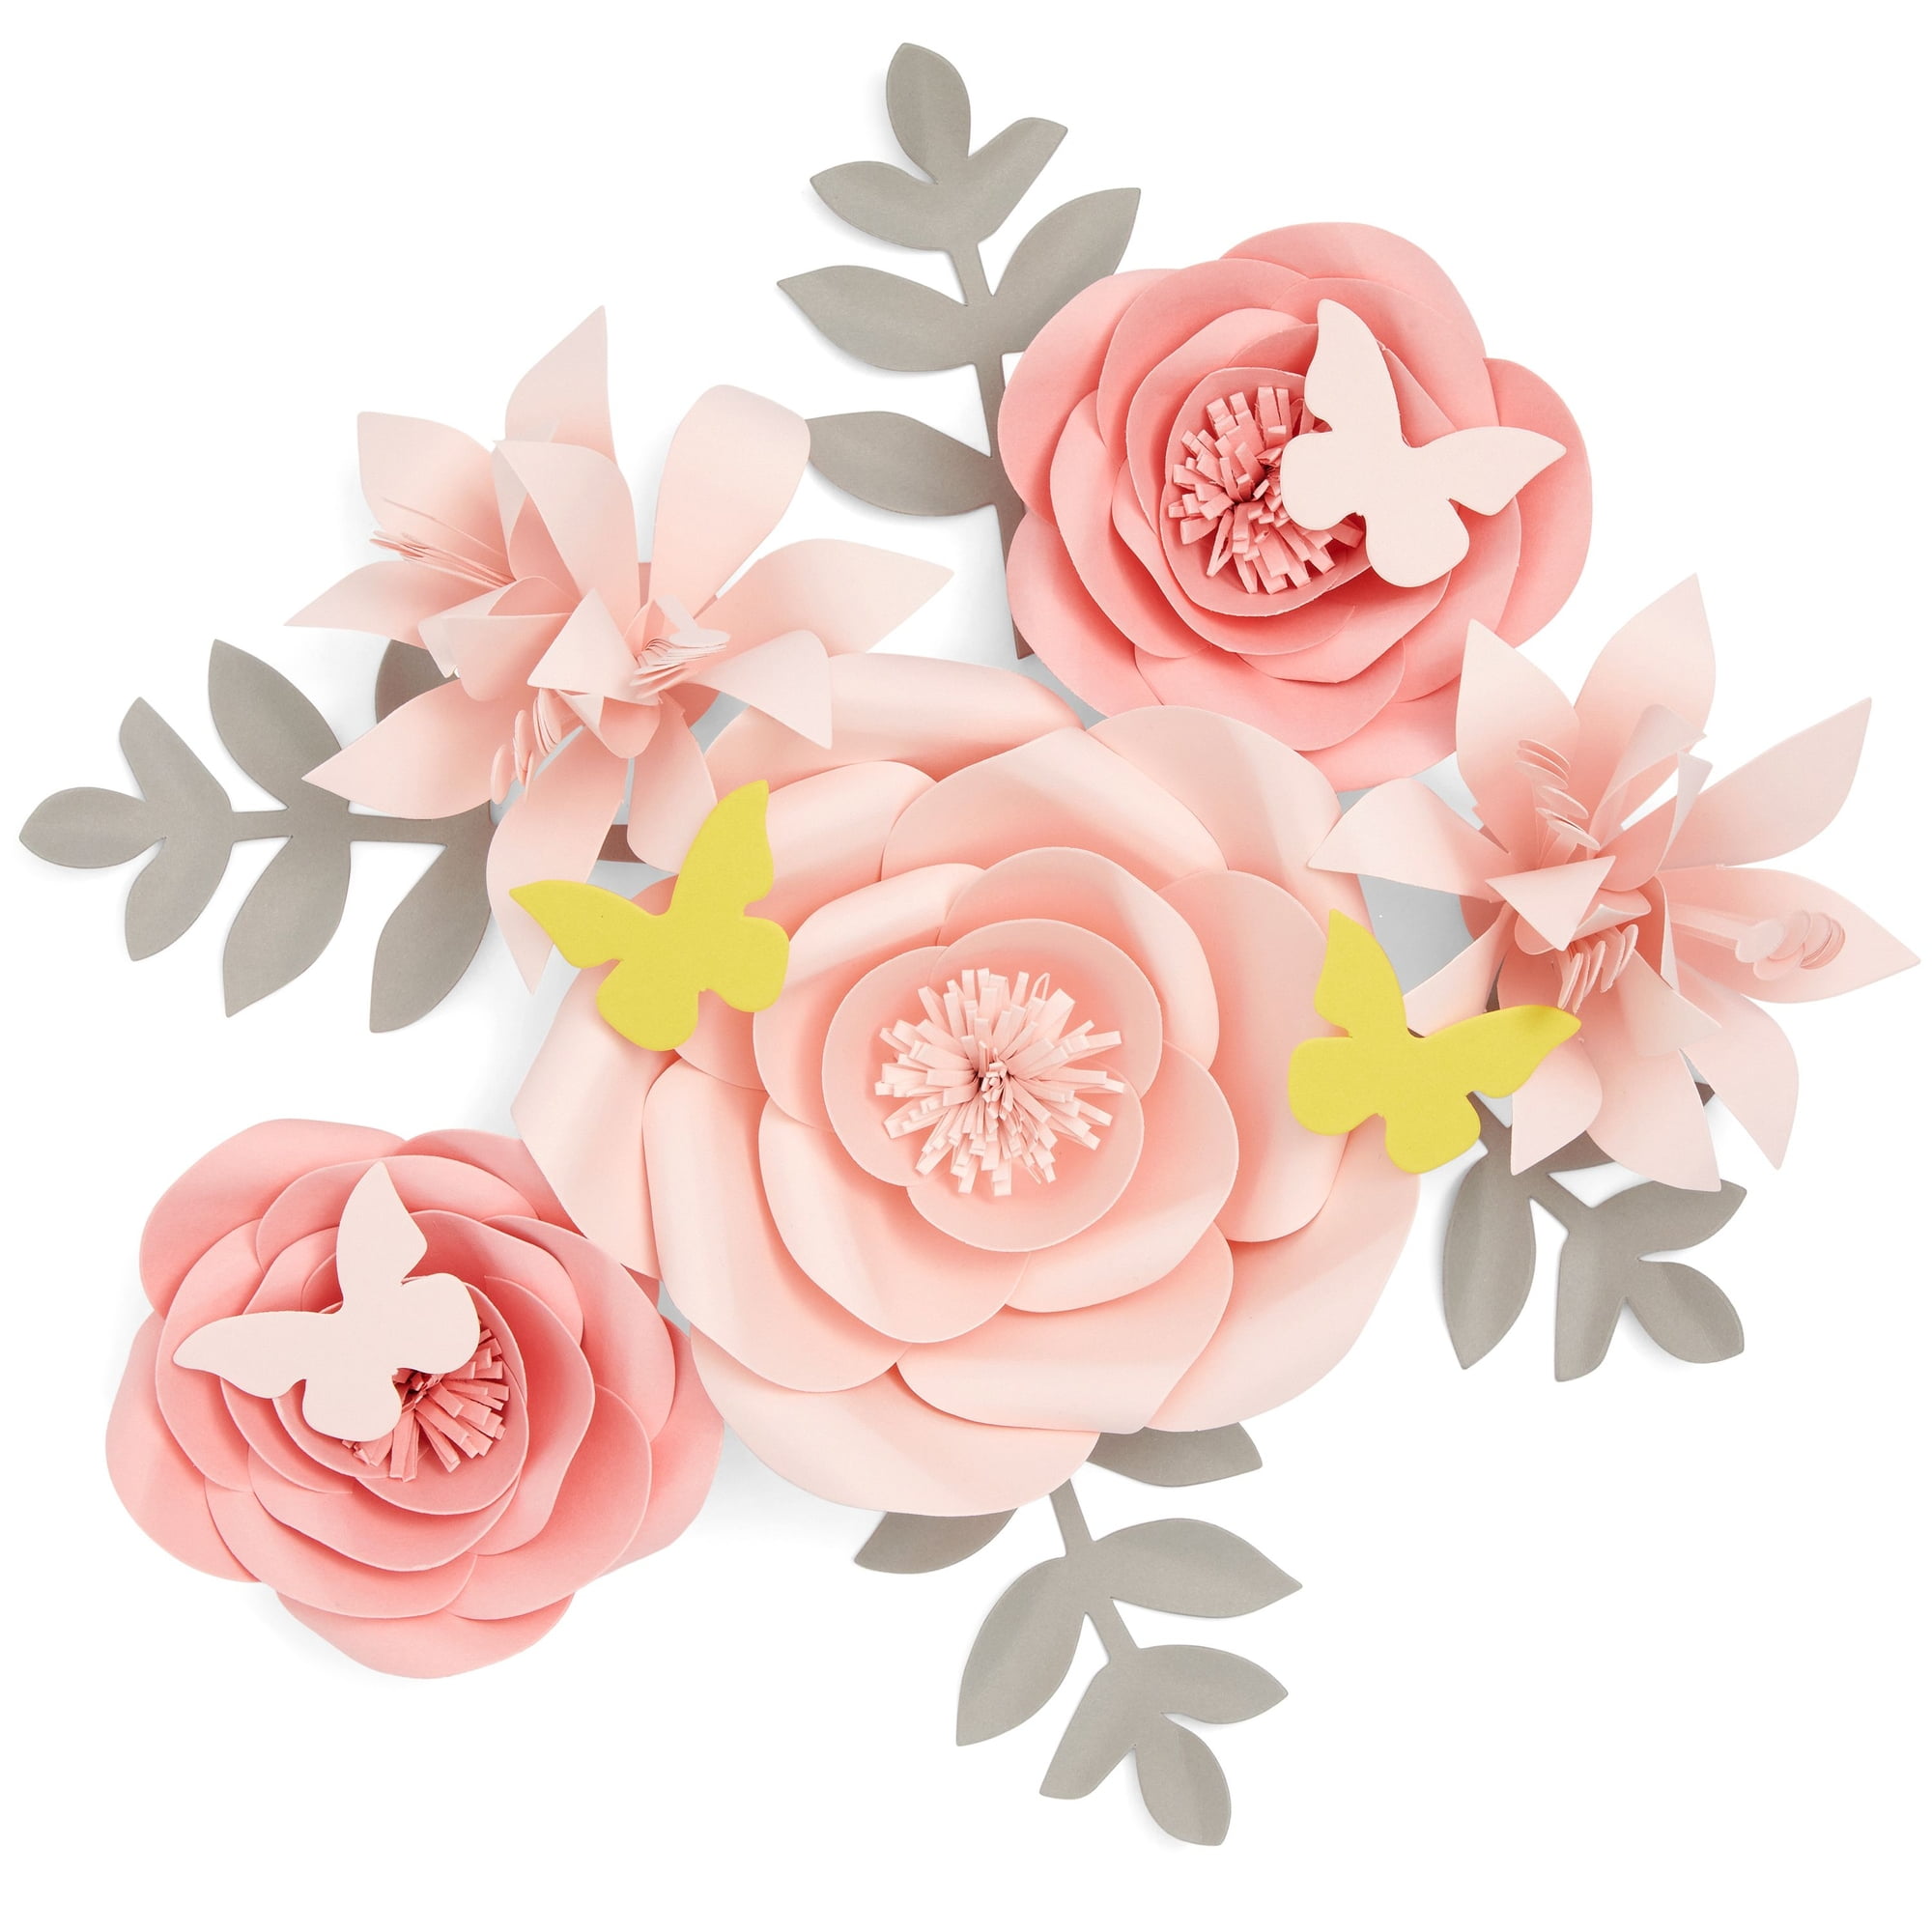 13 Pieces 3D Paper Flowers Decorations For Wall Decor, Pink Floral  Ornamentation with Lilies, Butterflies